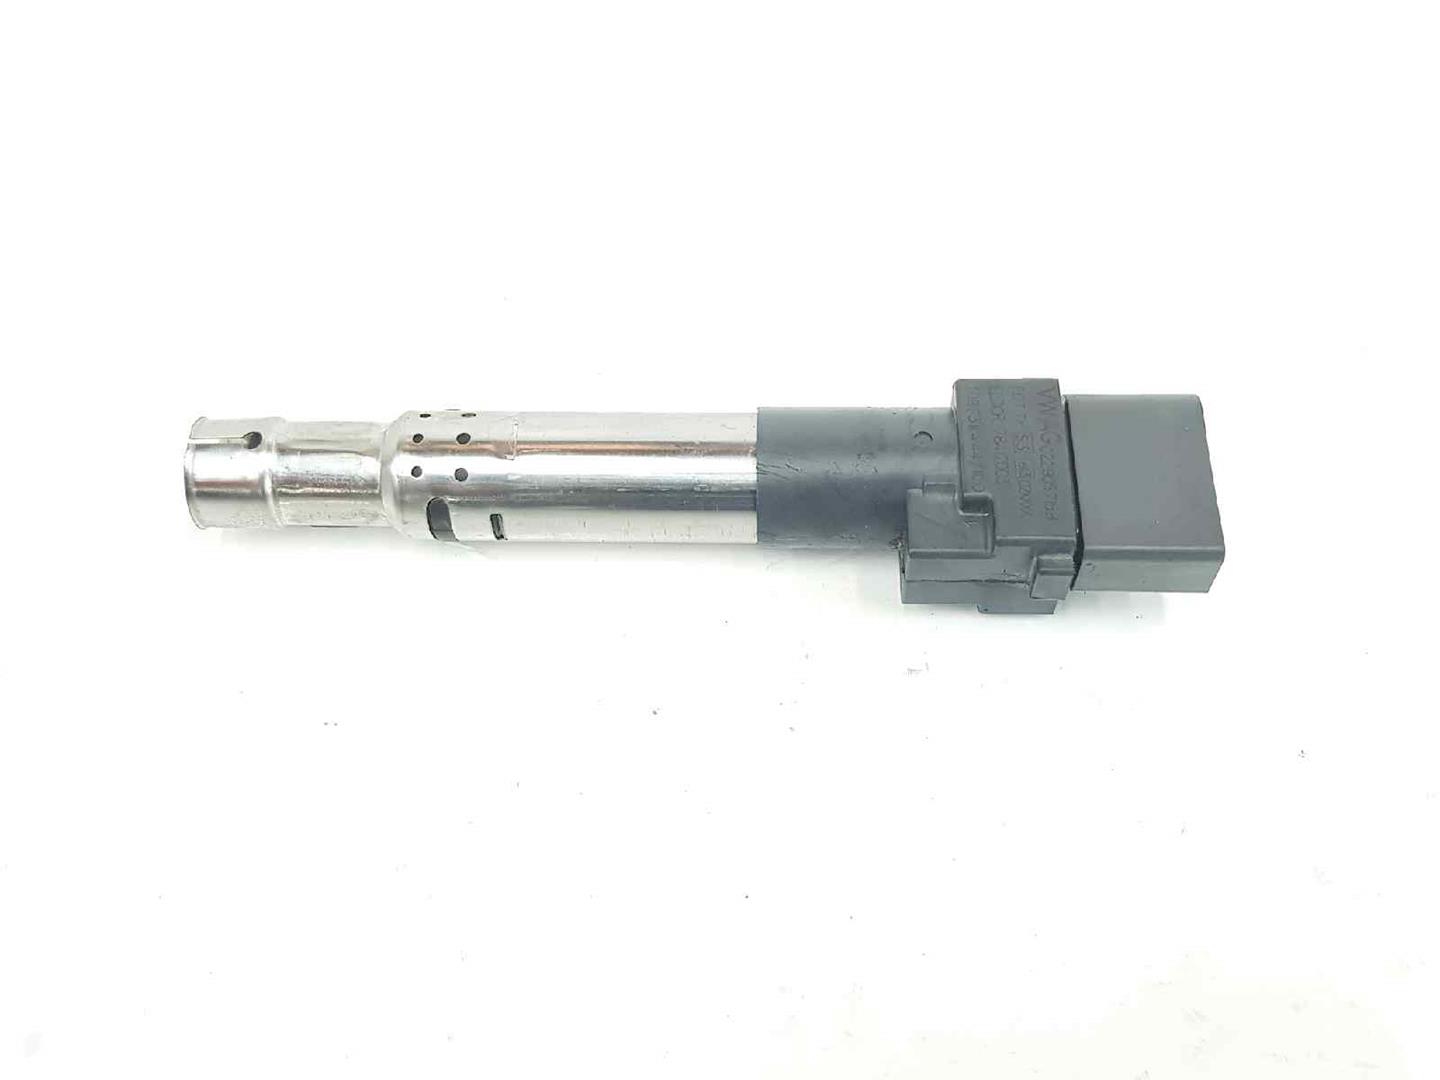 AUDI A2 8Z (1999-2005) High Voltage Ignition Coil 022905715B, 022905715B 19686170